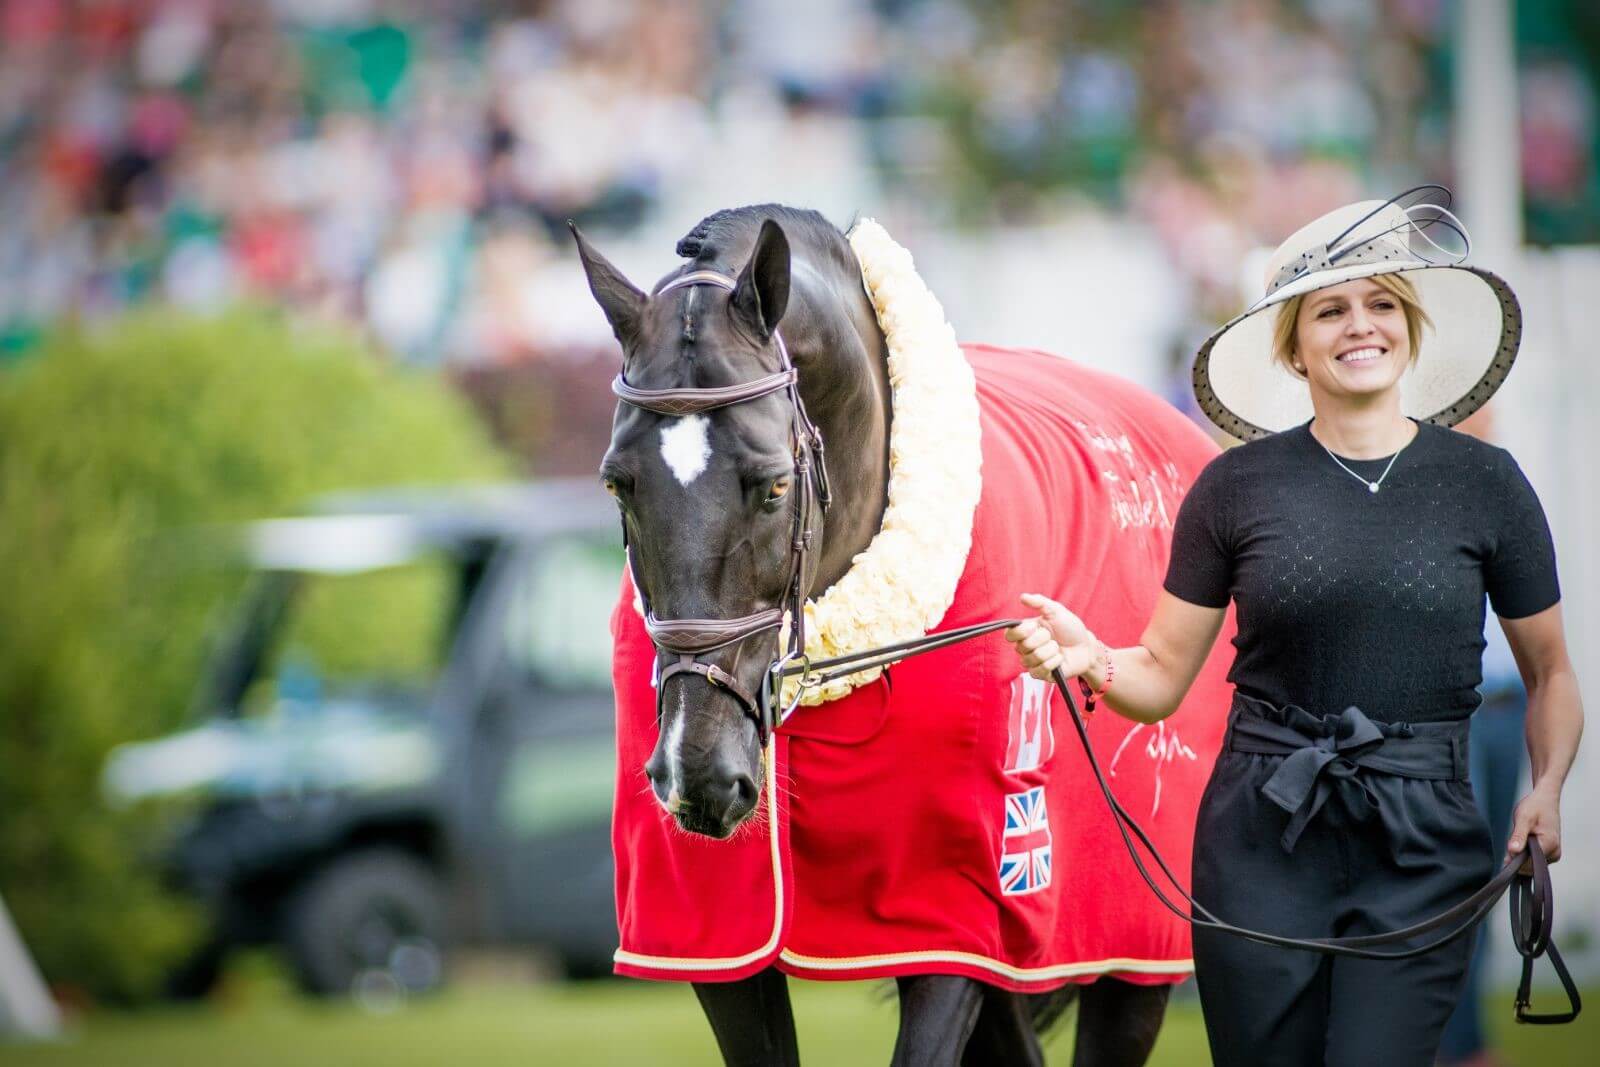 Tripple X III (Hugo), the beloved mount of Tiffany Foster was retired on July 28, 2019, in a ceremony at the CSIO Hickstead in his birthplace of Great Britain. Photo by Tilly Berendt